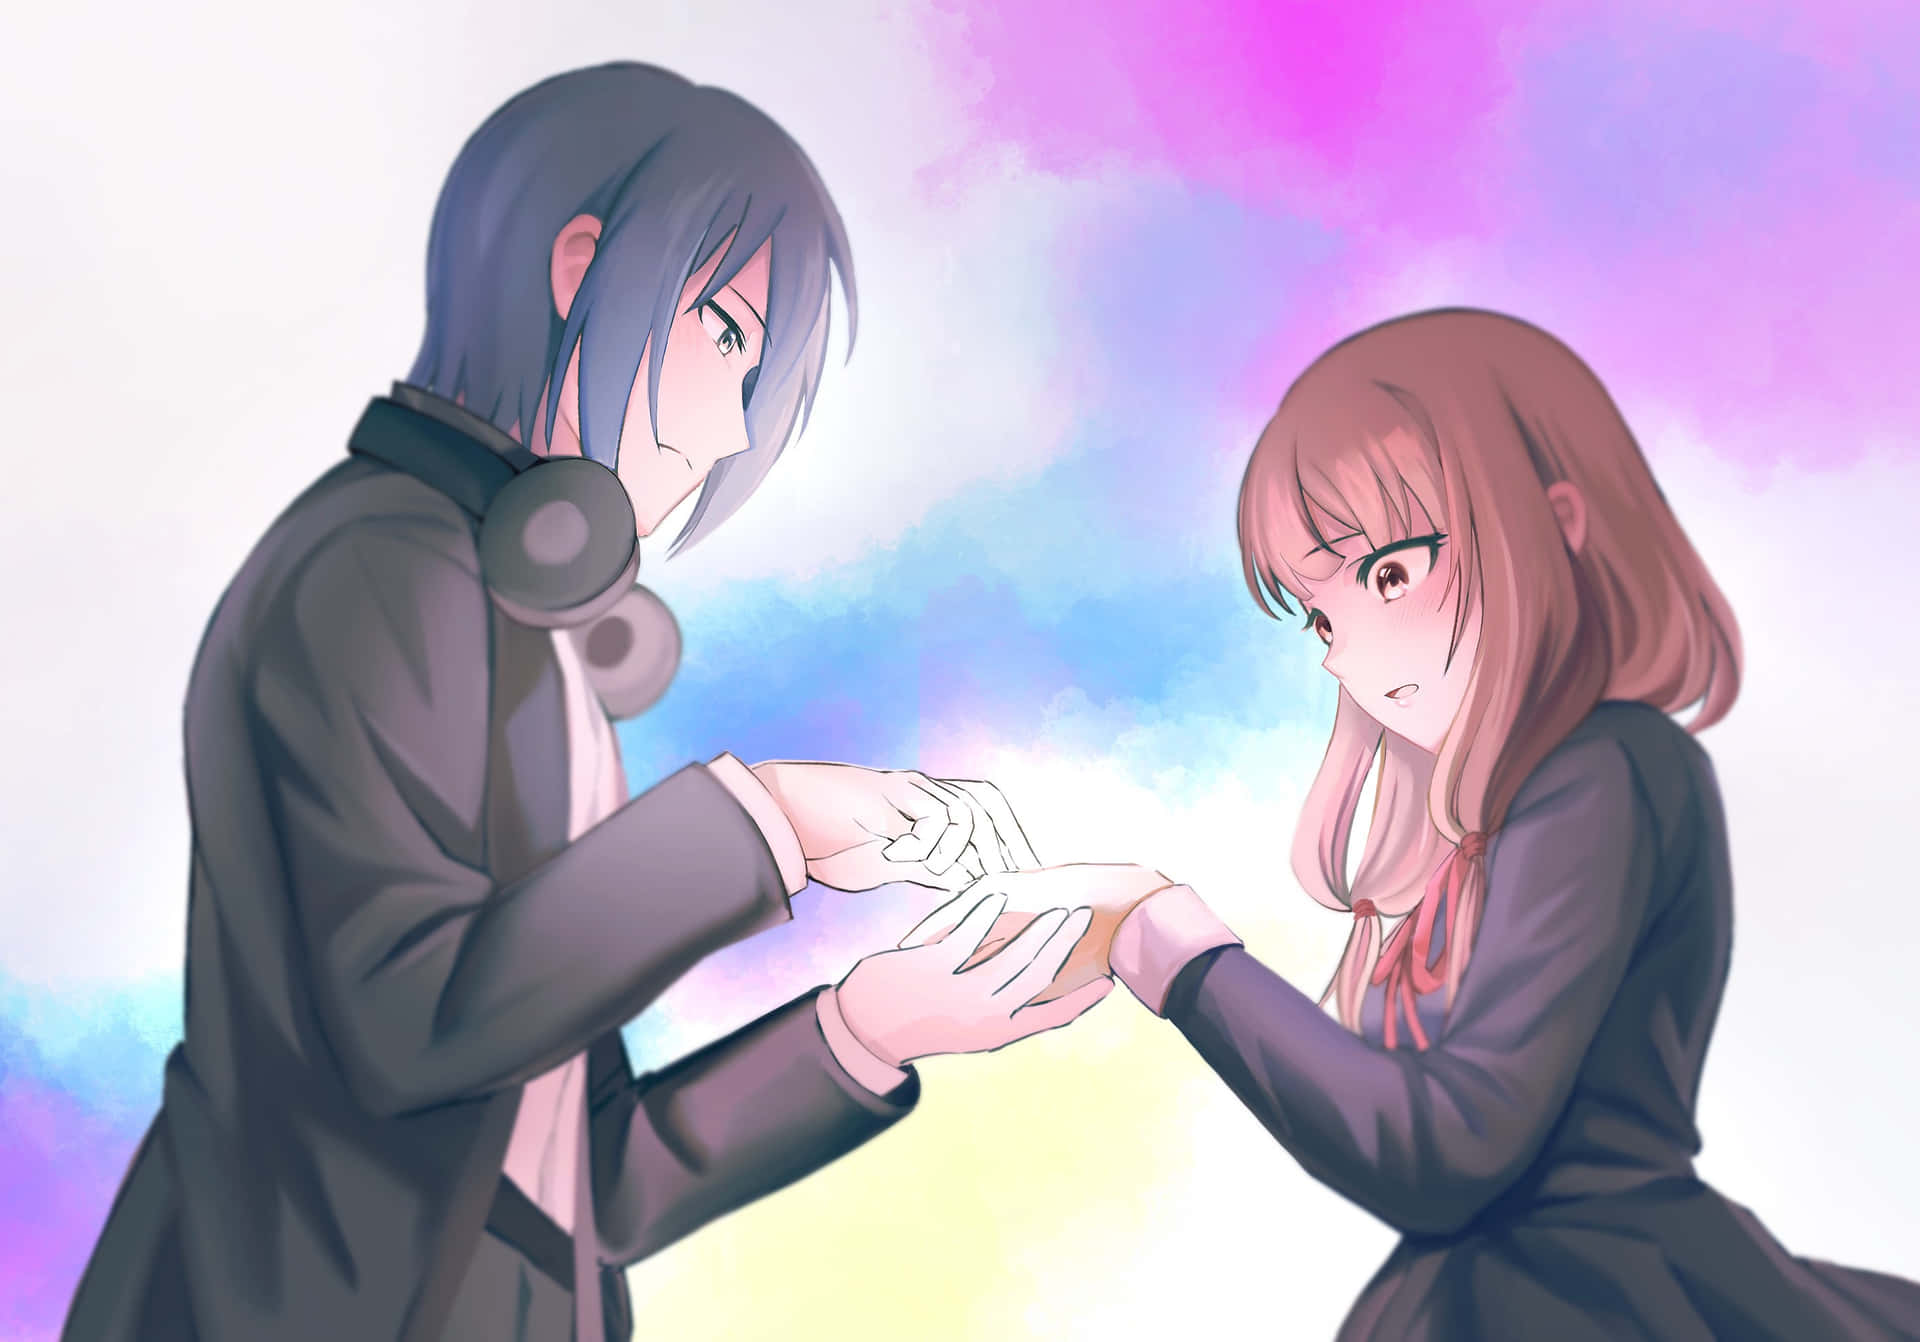 CUTE ANIME COUPLES HOLDING HANDS